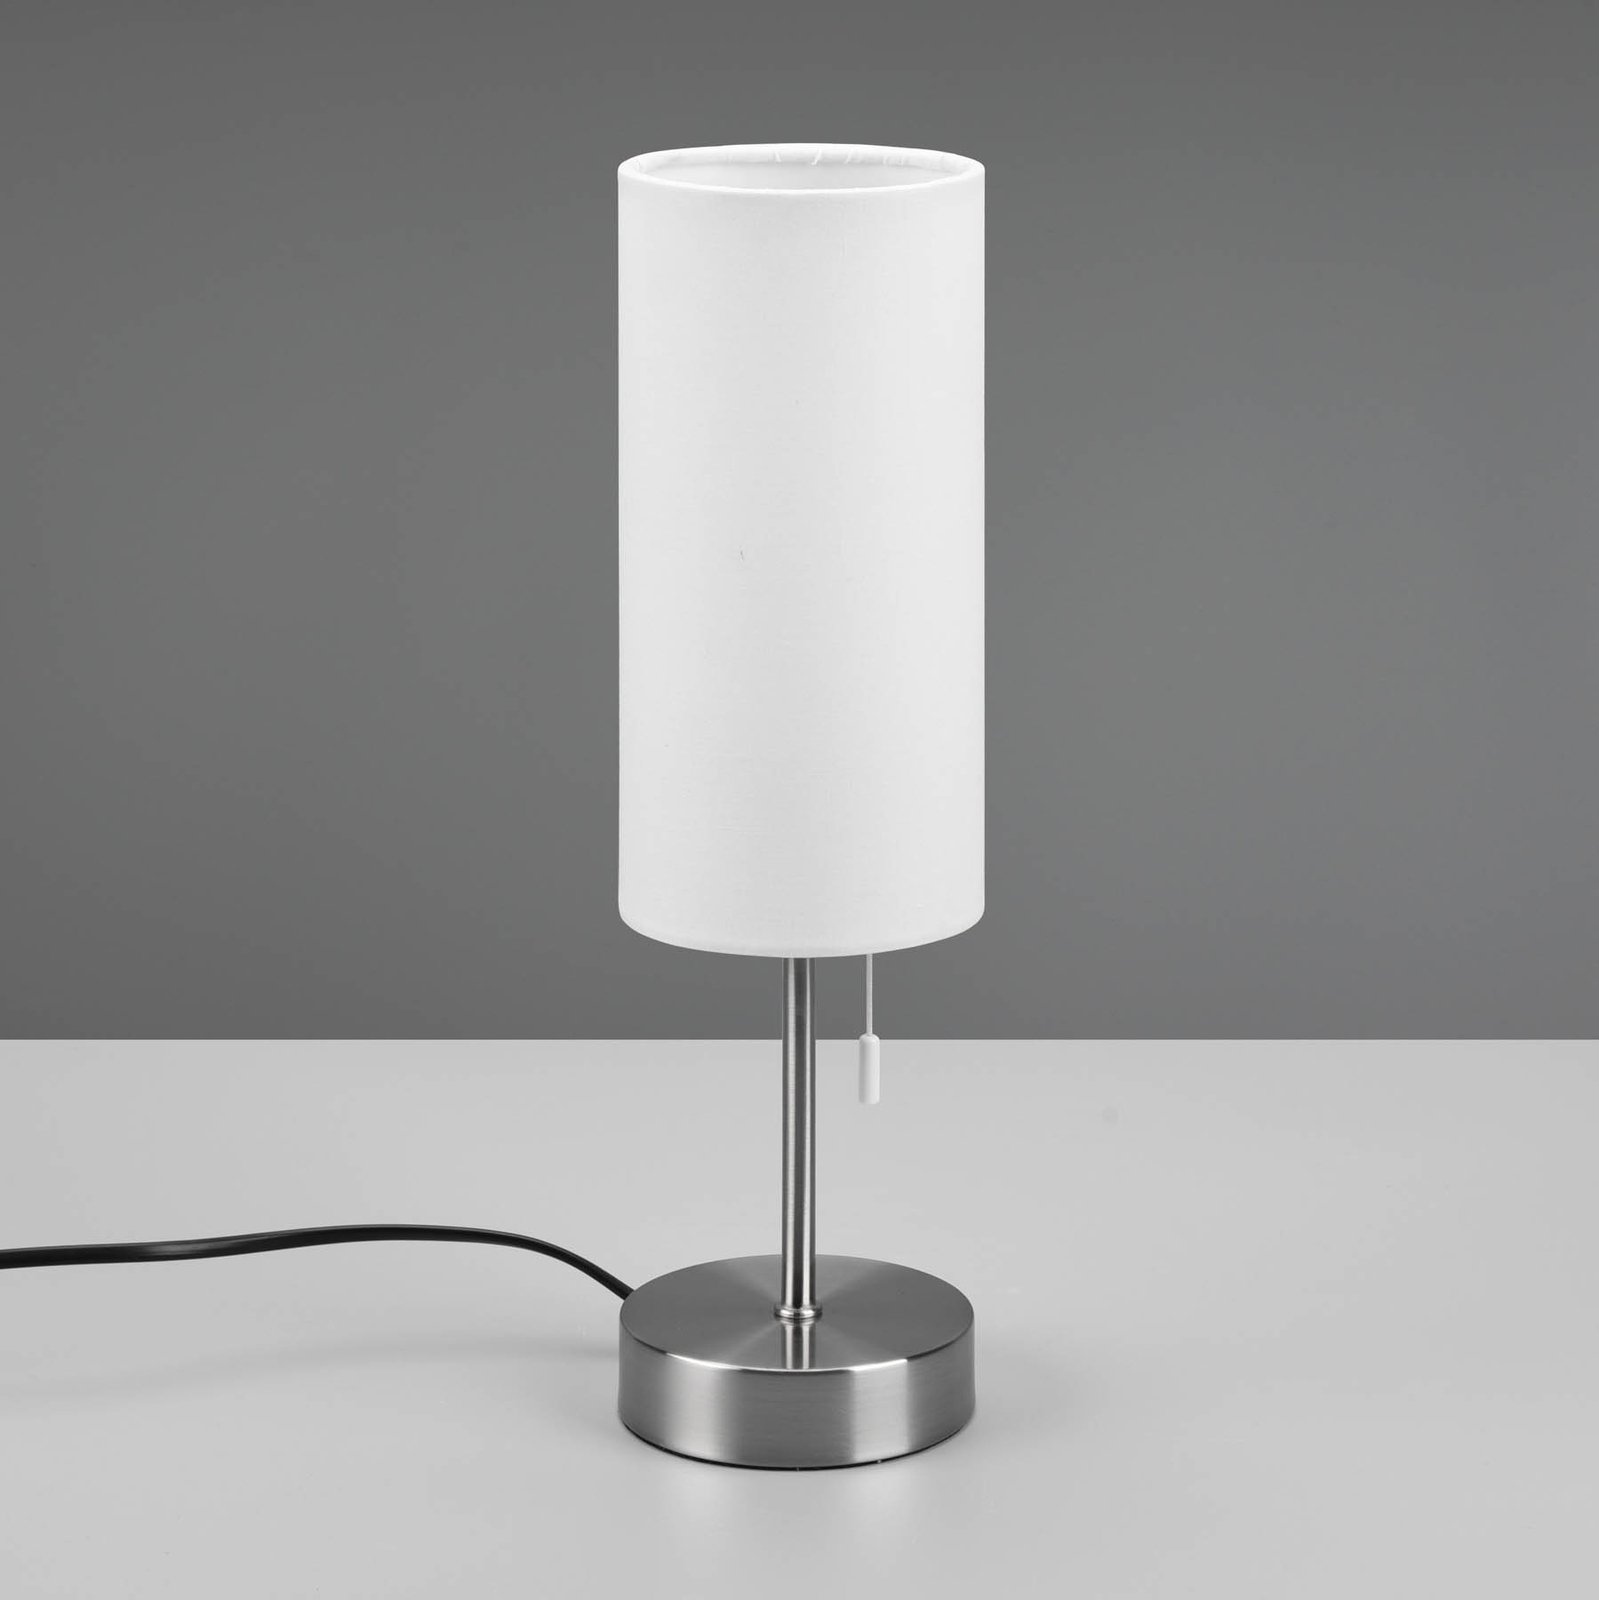 Jaro table lamp with USB port, white/nickel